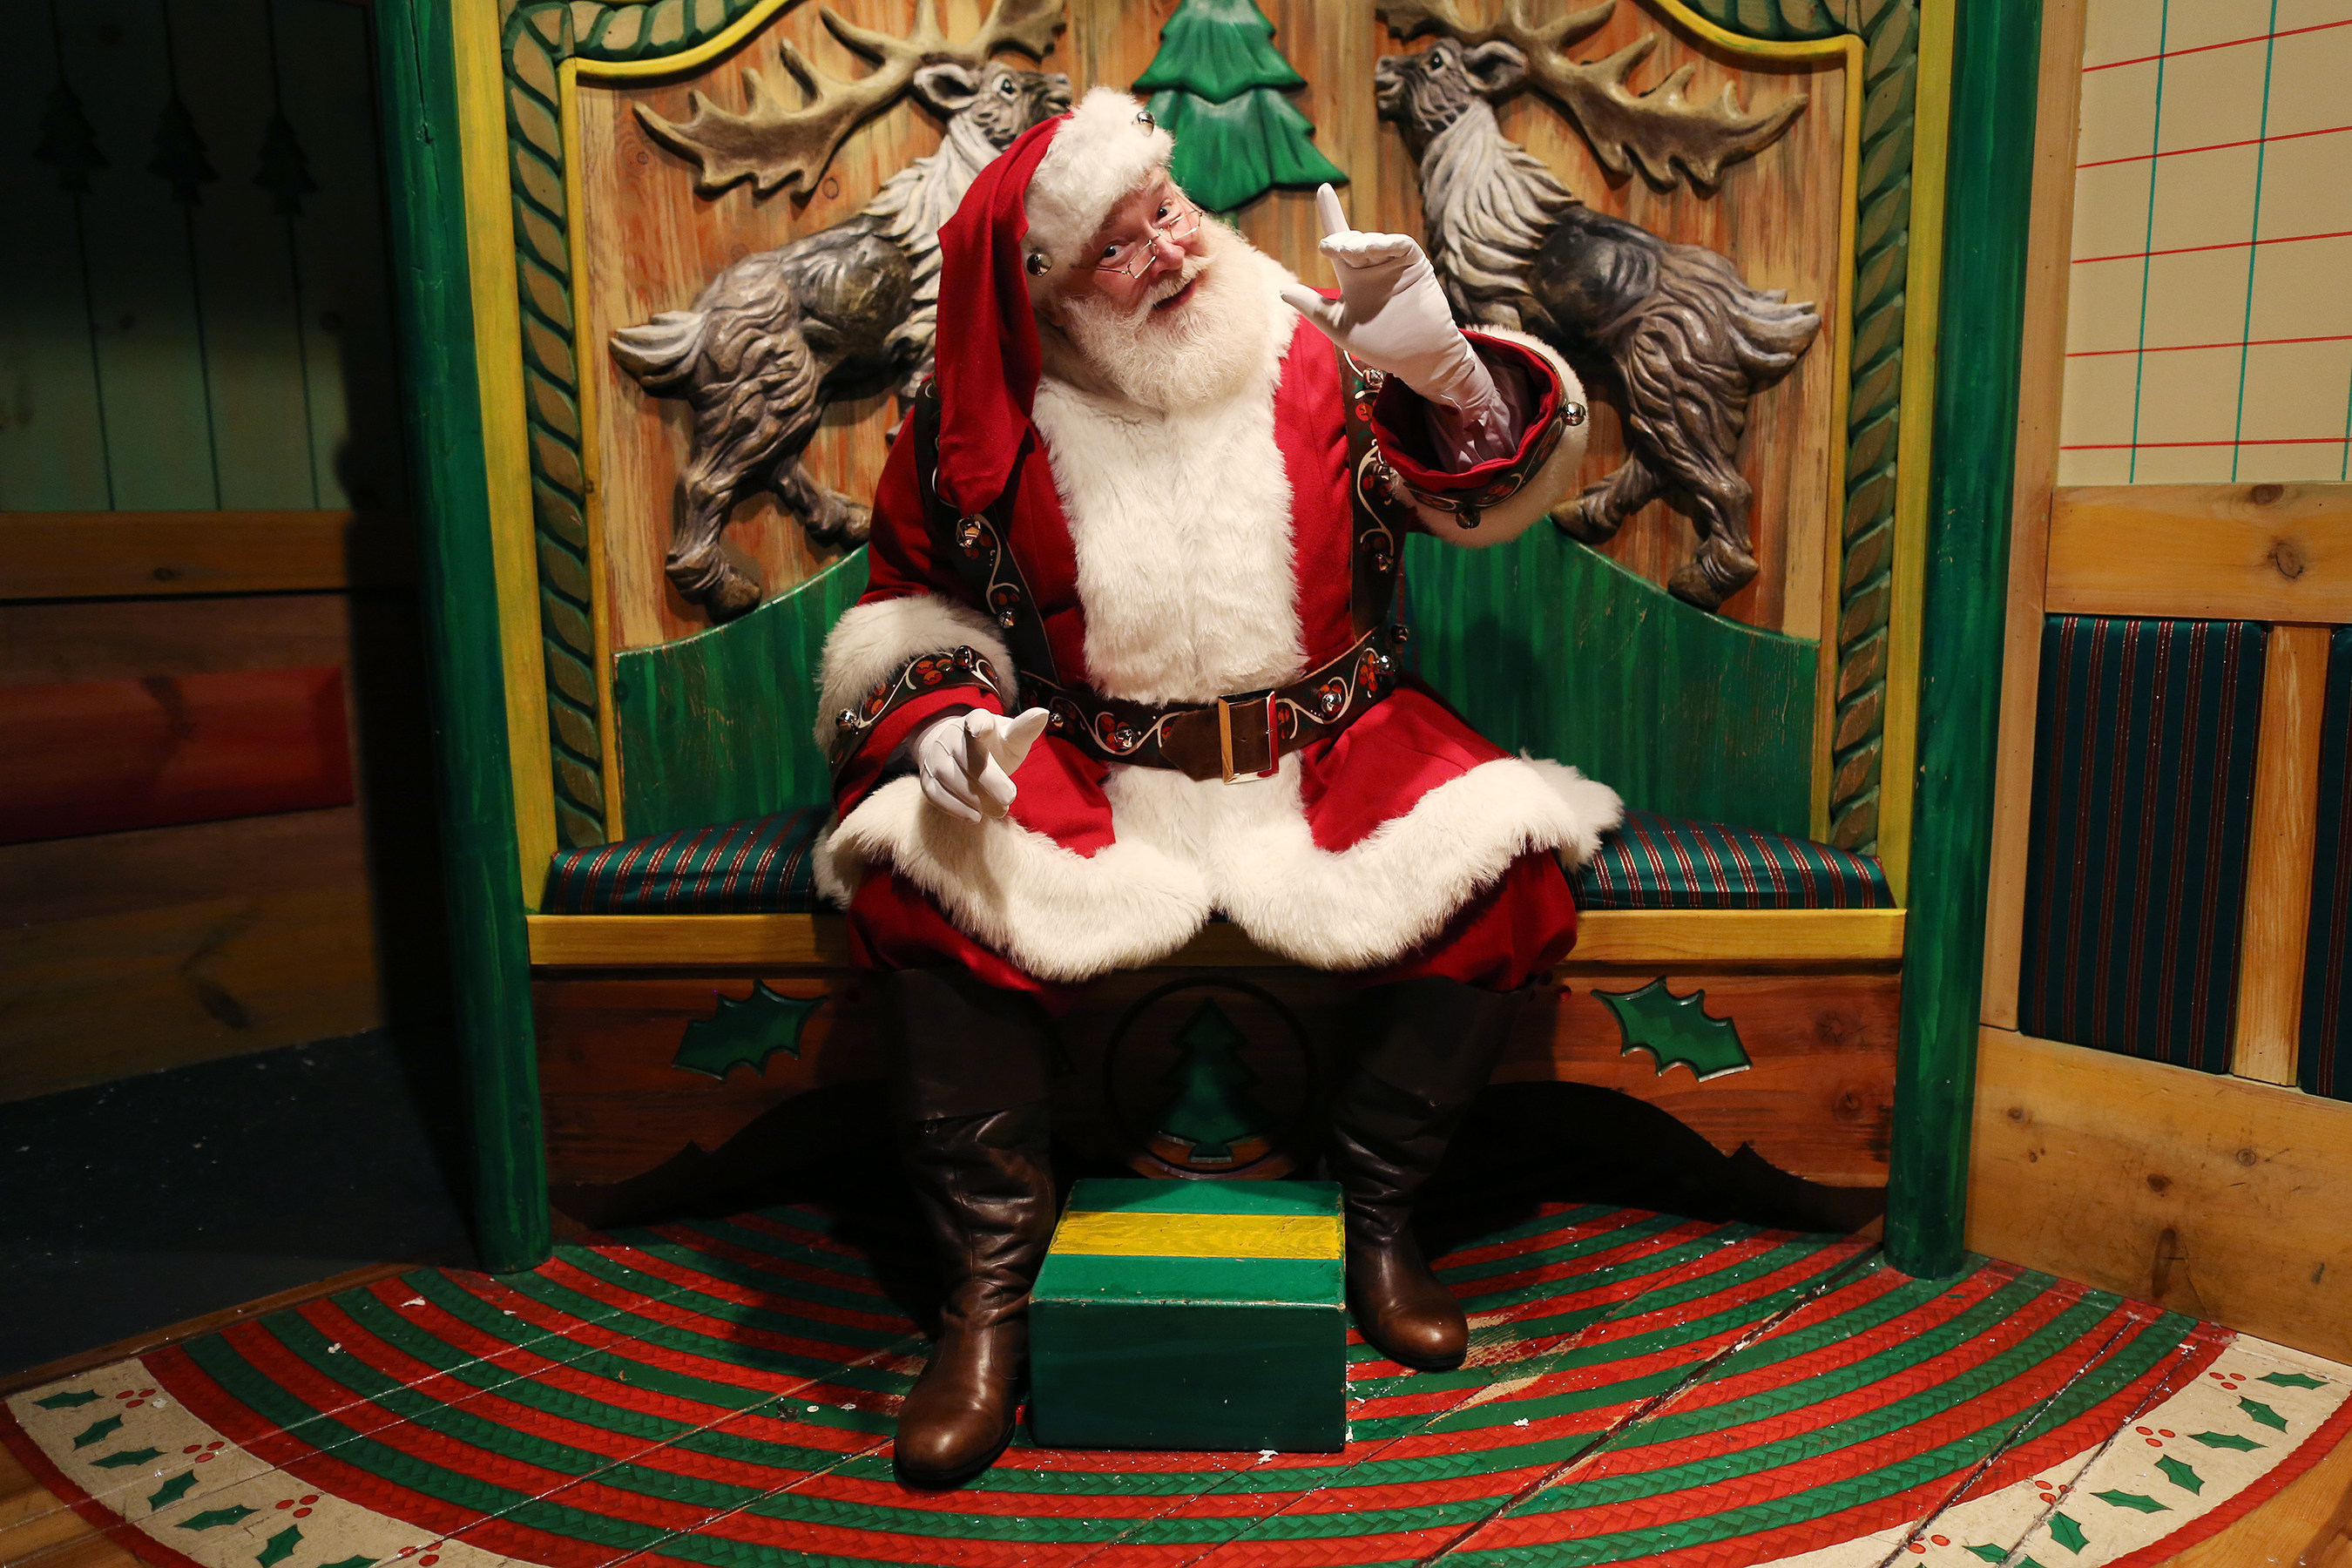 The One-And-Only Santa Claus at Macy's Herald Square. John Minchillo/AP Images for Macy's Inc.